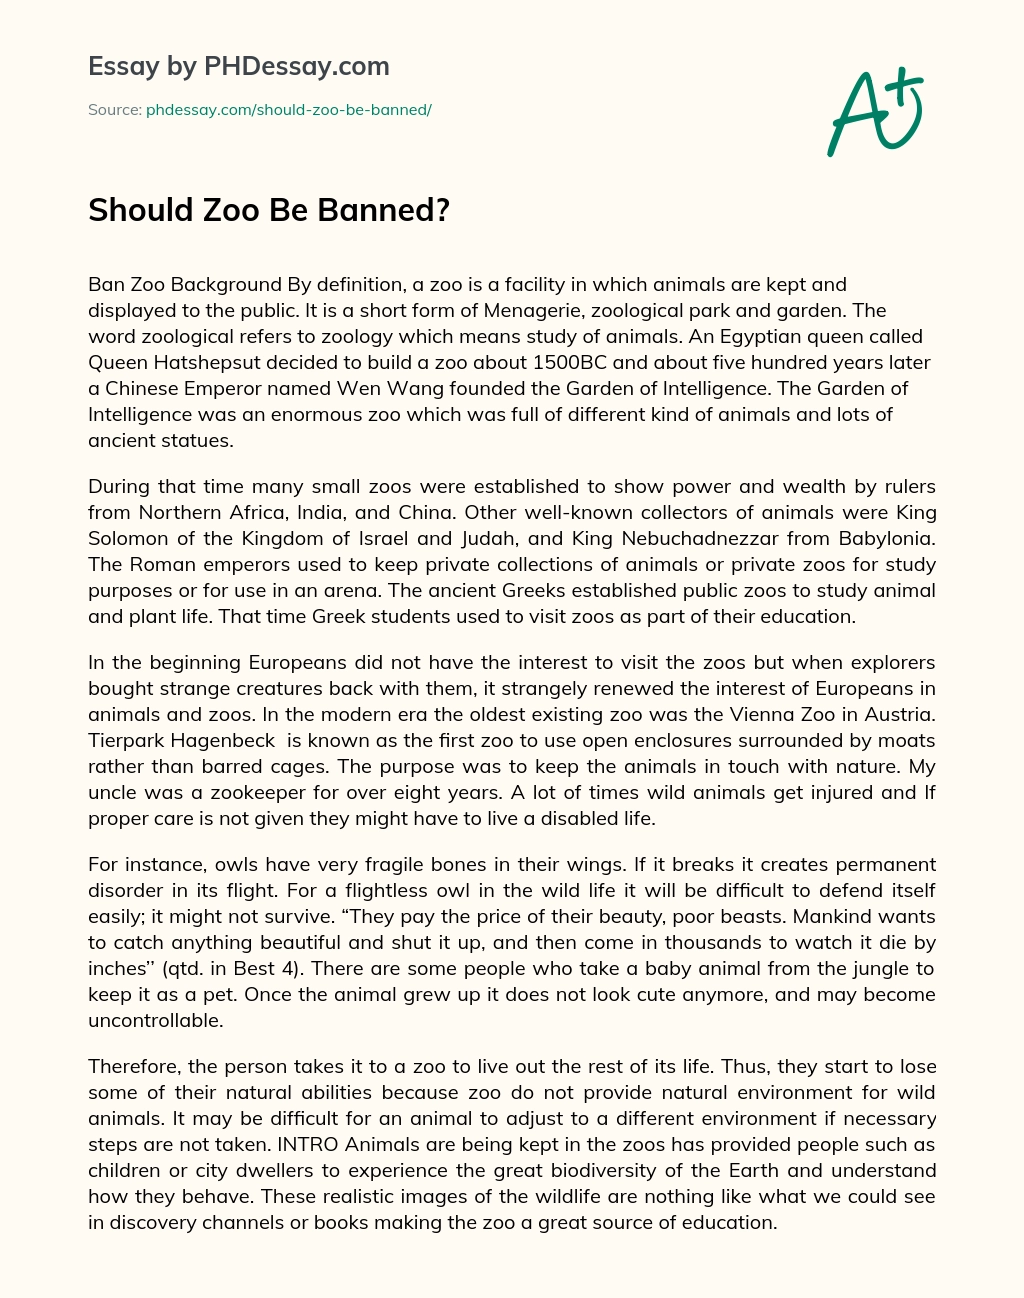 Should Zoo Be Banned? essay